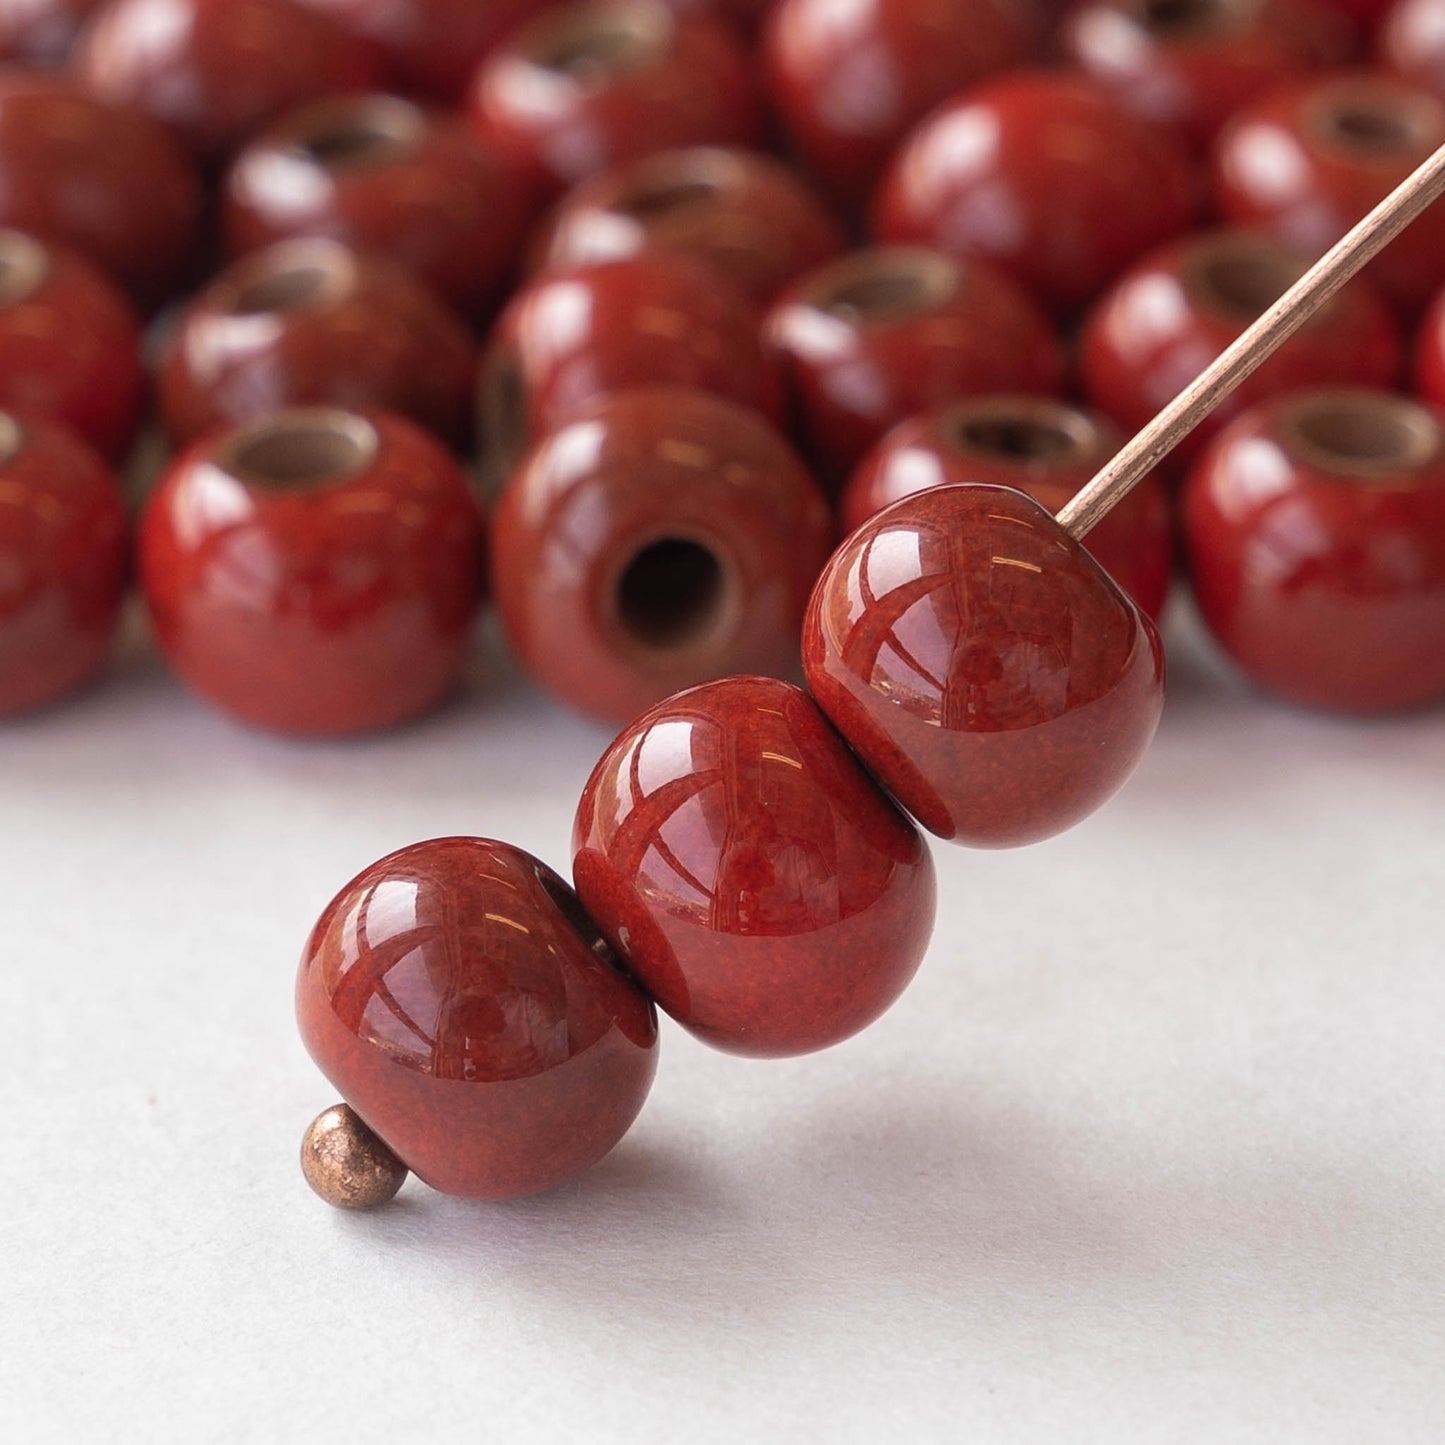 Load image into Gallery viewer, 10mm Glazed Ceramic Round Beads - Opaque Crimson Red - 6 or 18
